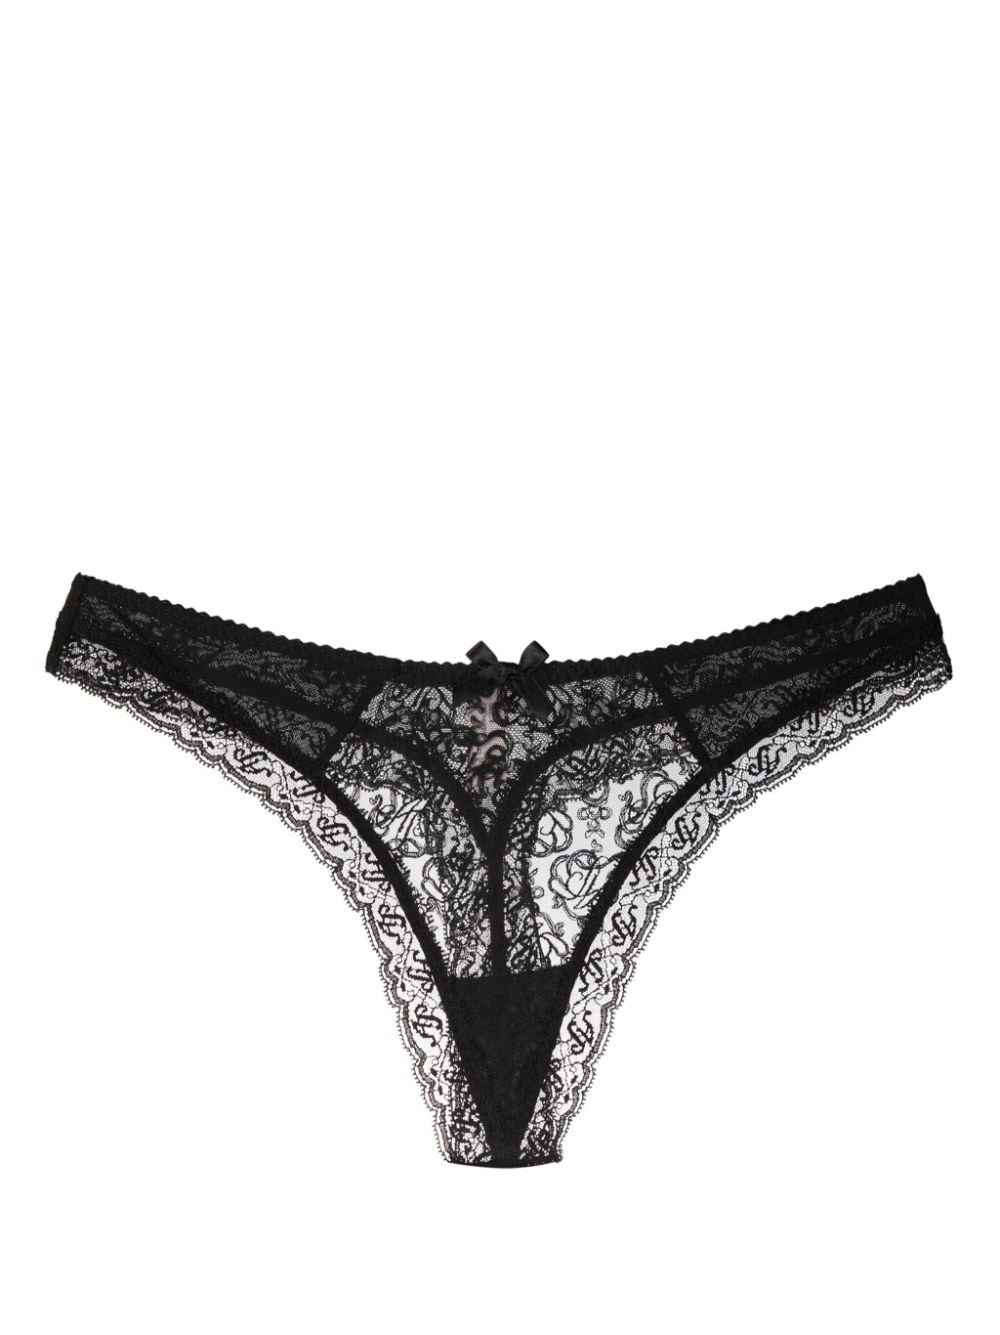 AGENT PROVOCATEUR MERCY CHANTILLY-LACE THONG